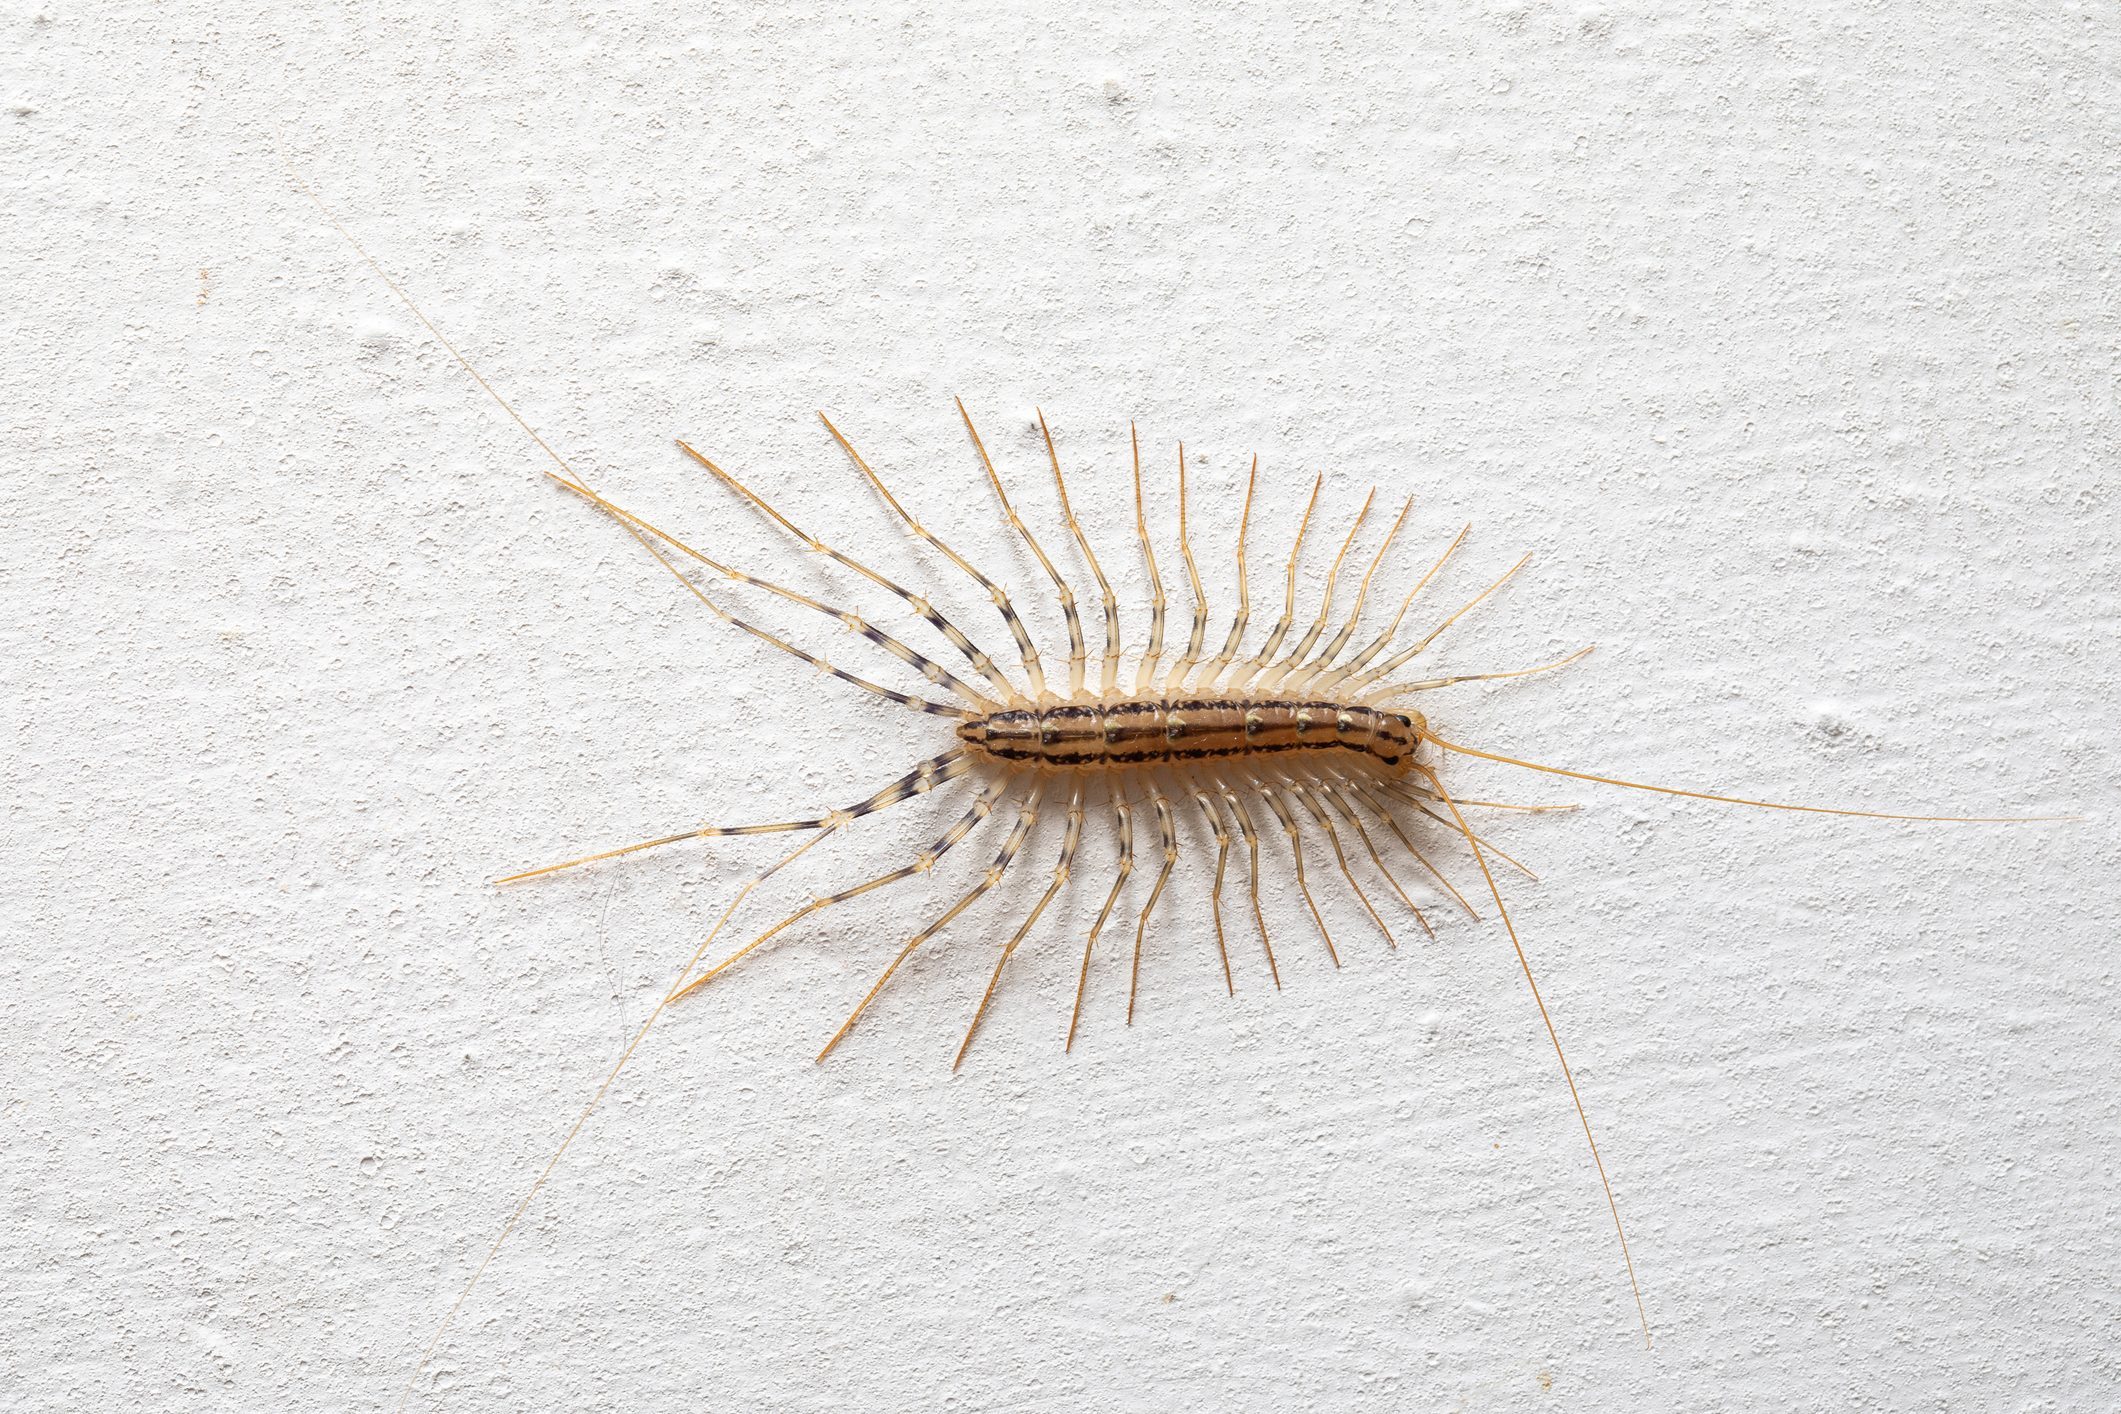 How to Get Rid of House Centipedes, and Why You Shouldn't Kill Them